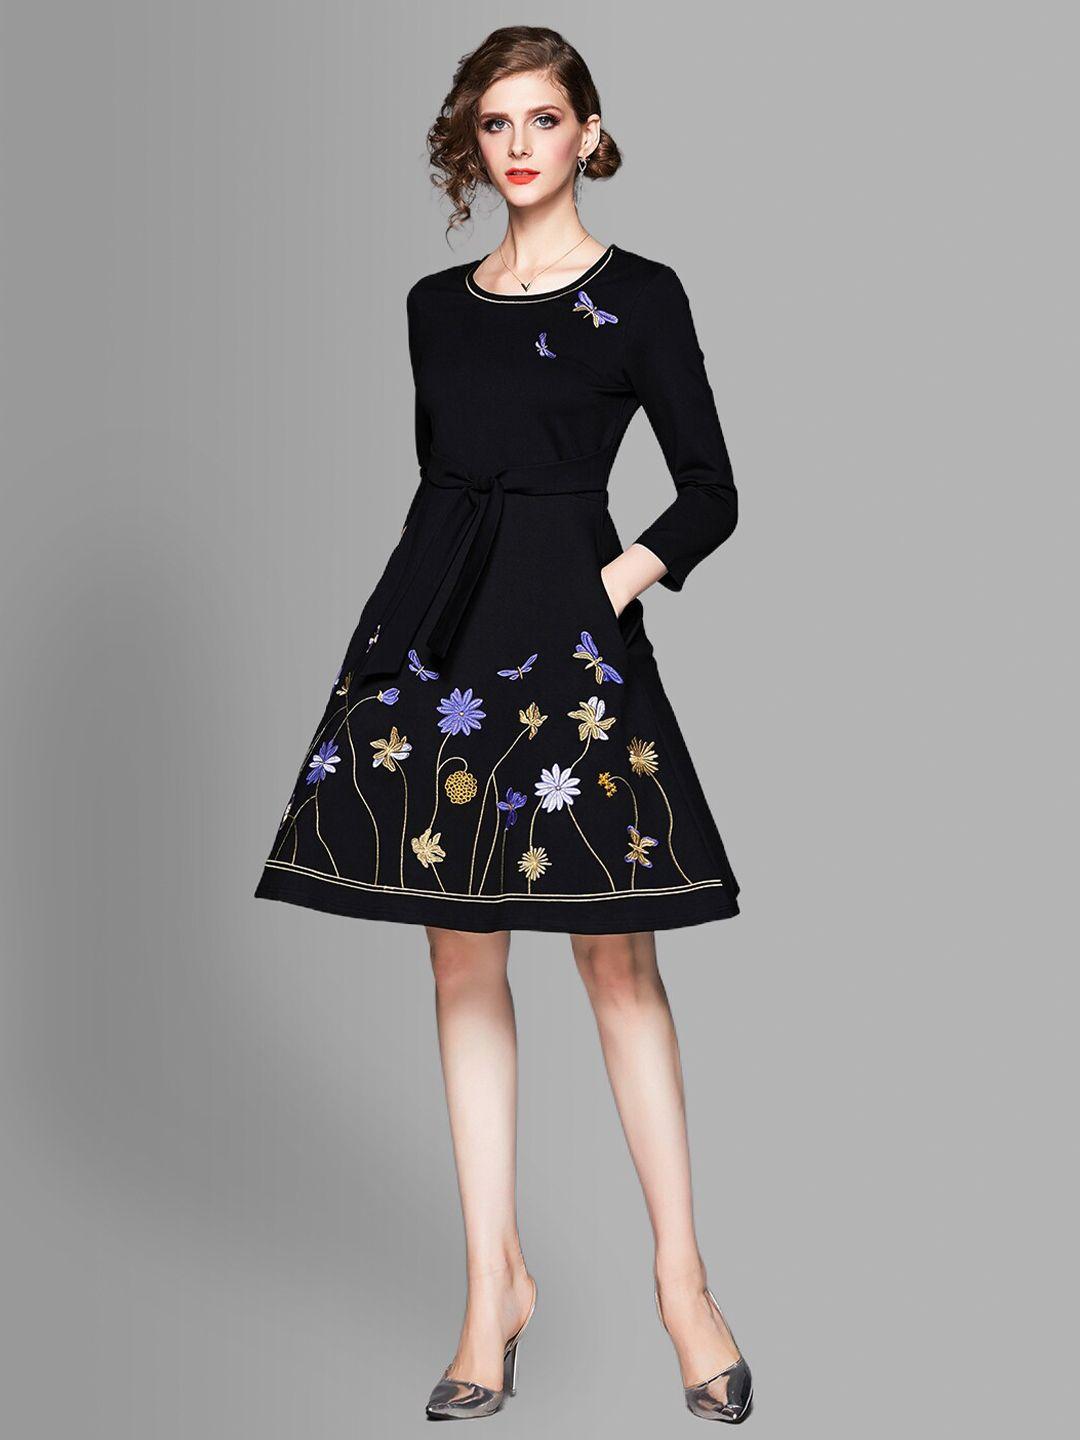 jc-collection-women-black-floral-embroidered-fit-&-flare-dress